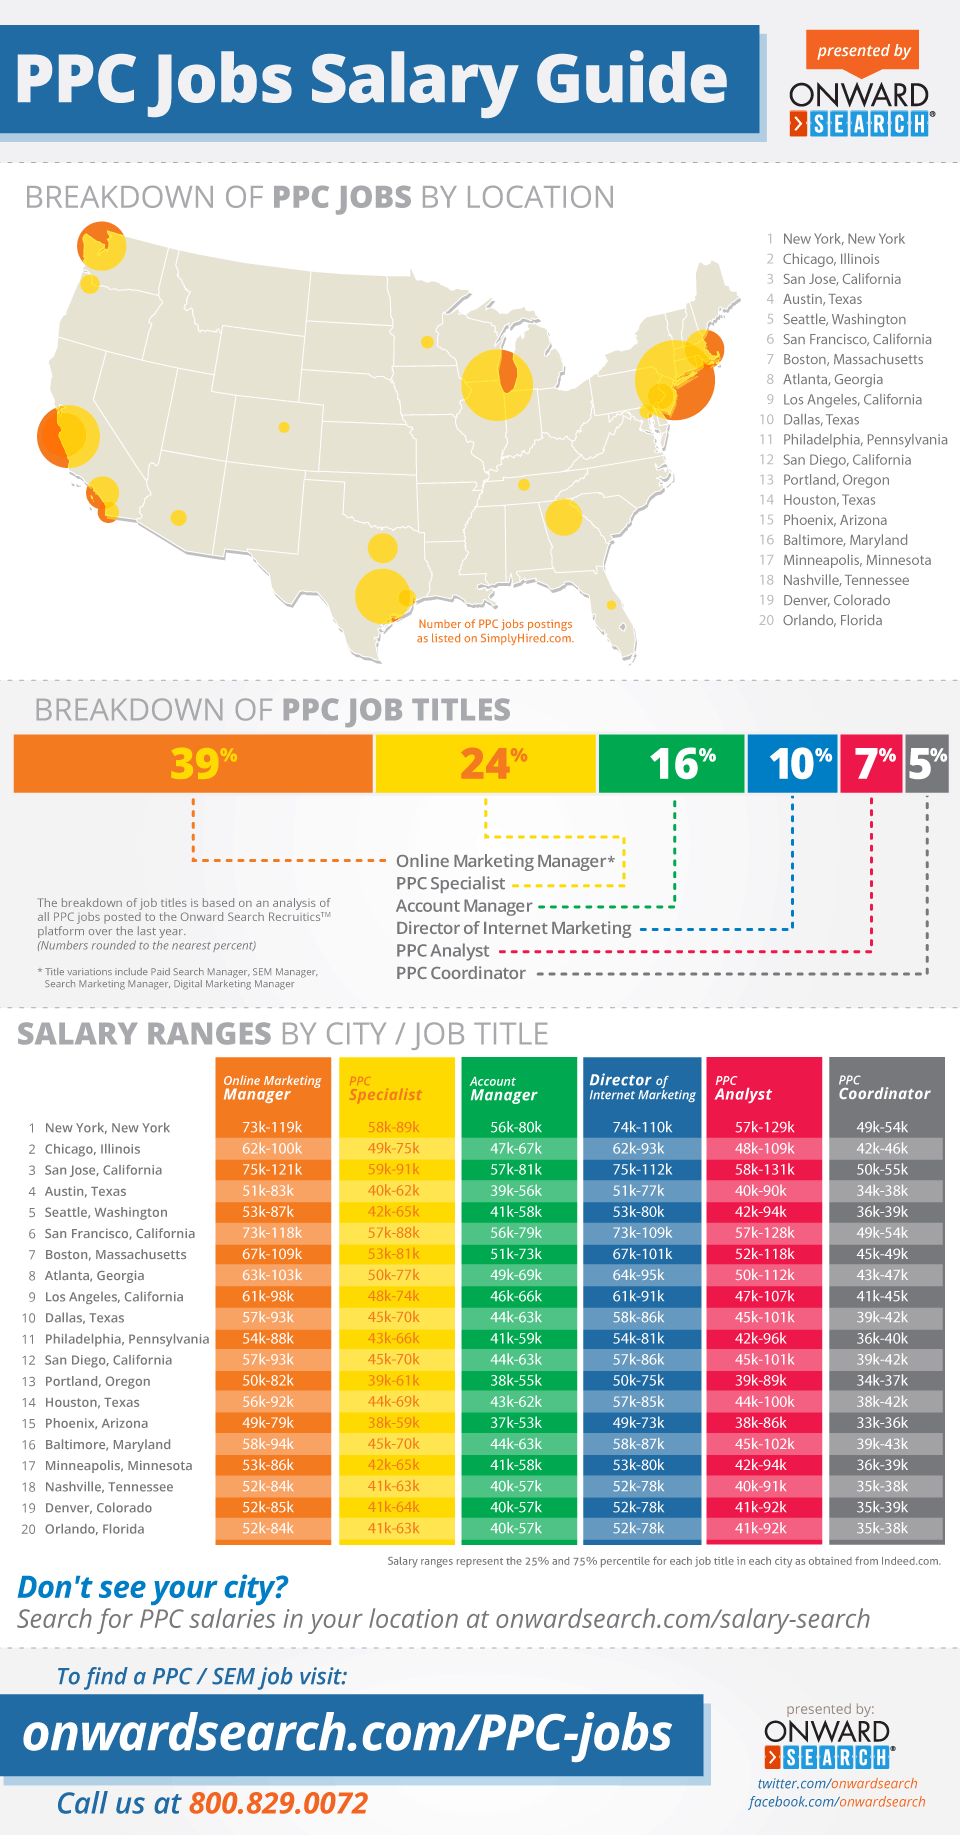 IV. The most in-demand jobs in Colorado